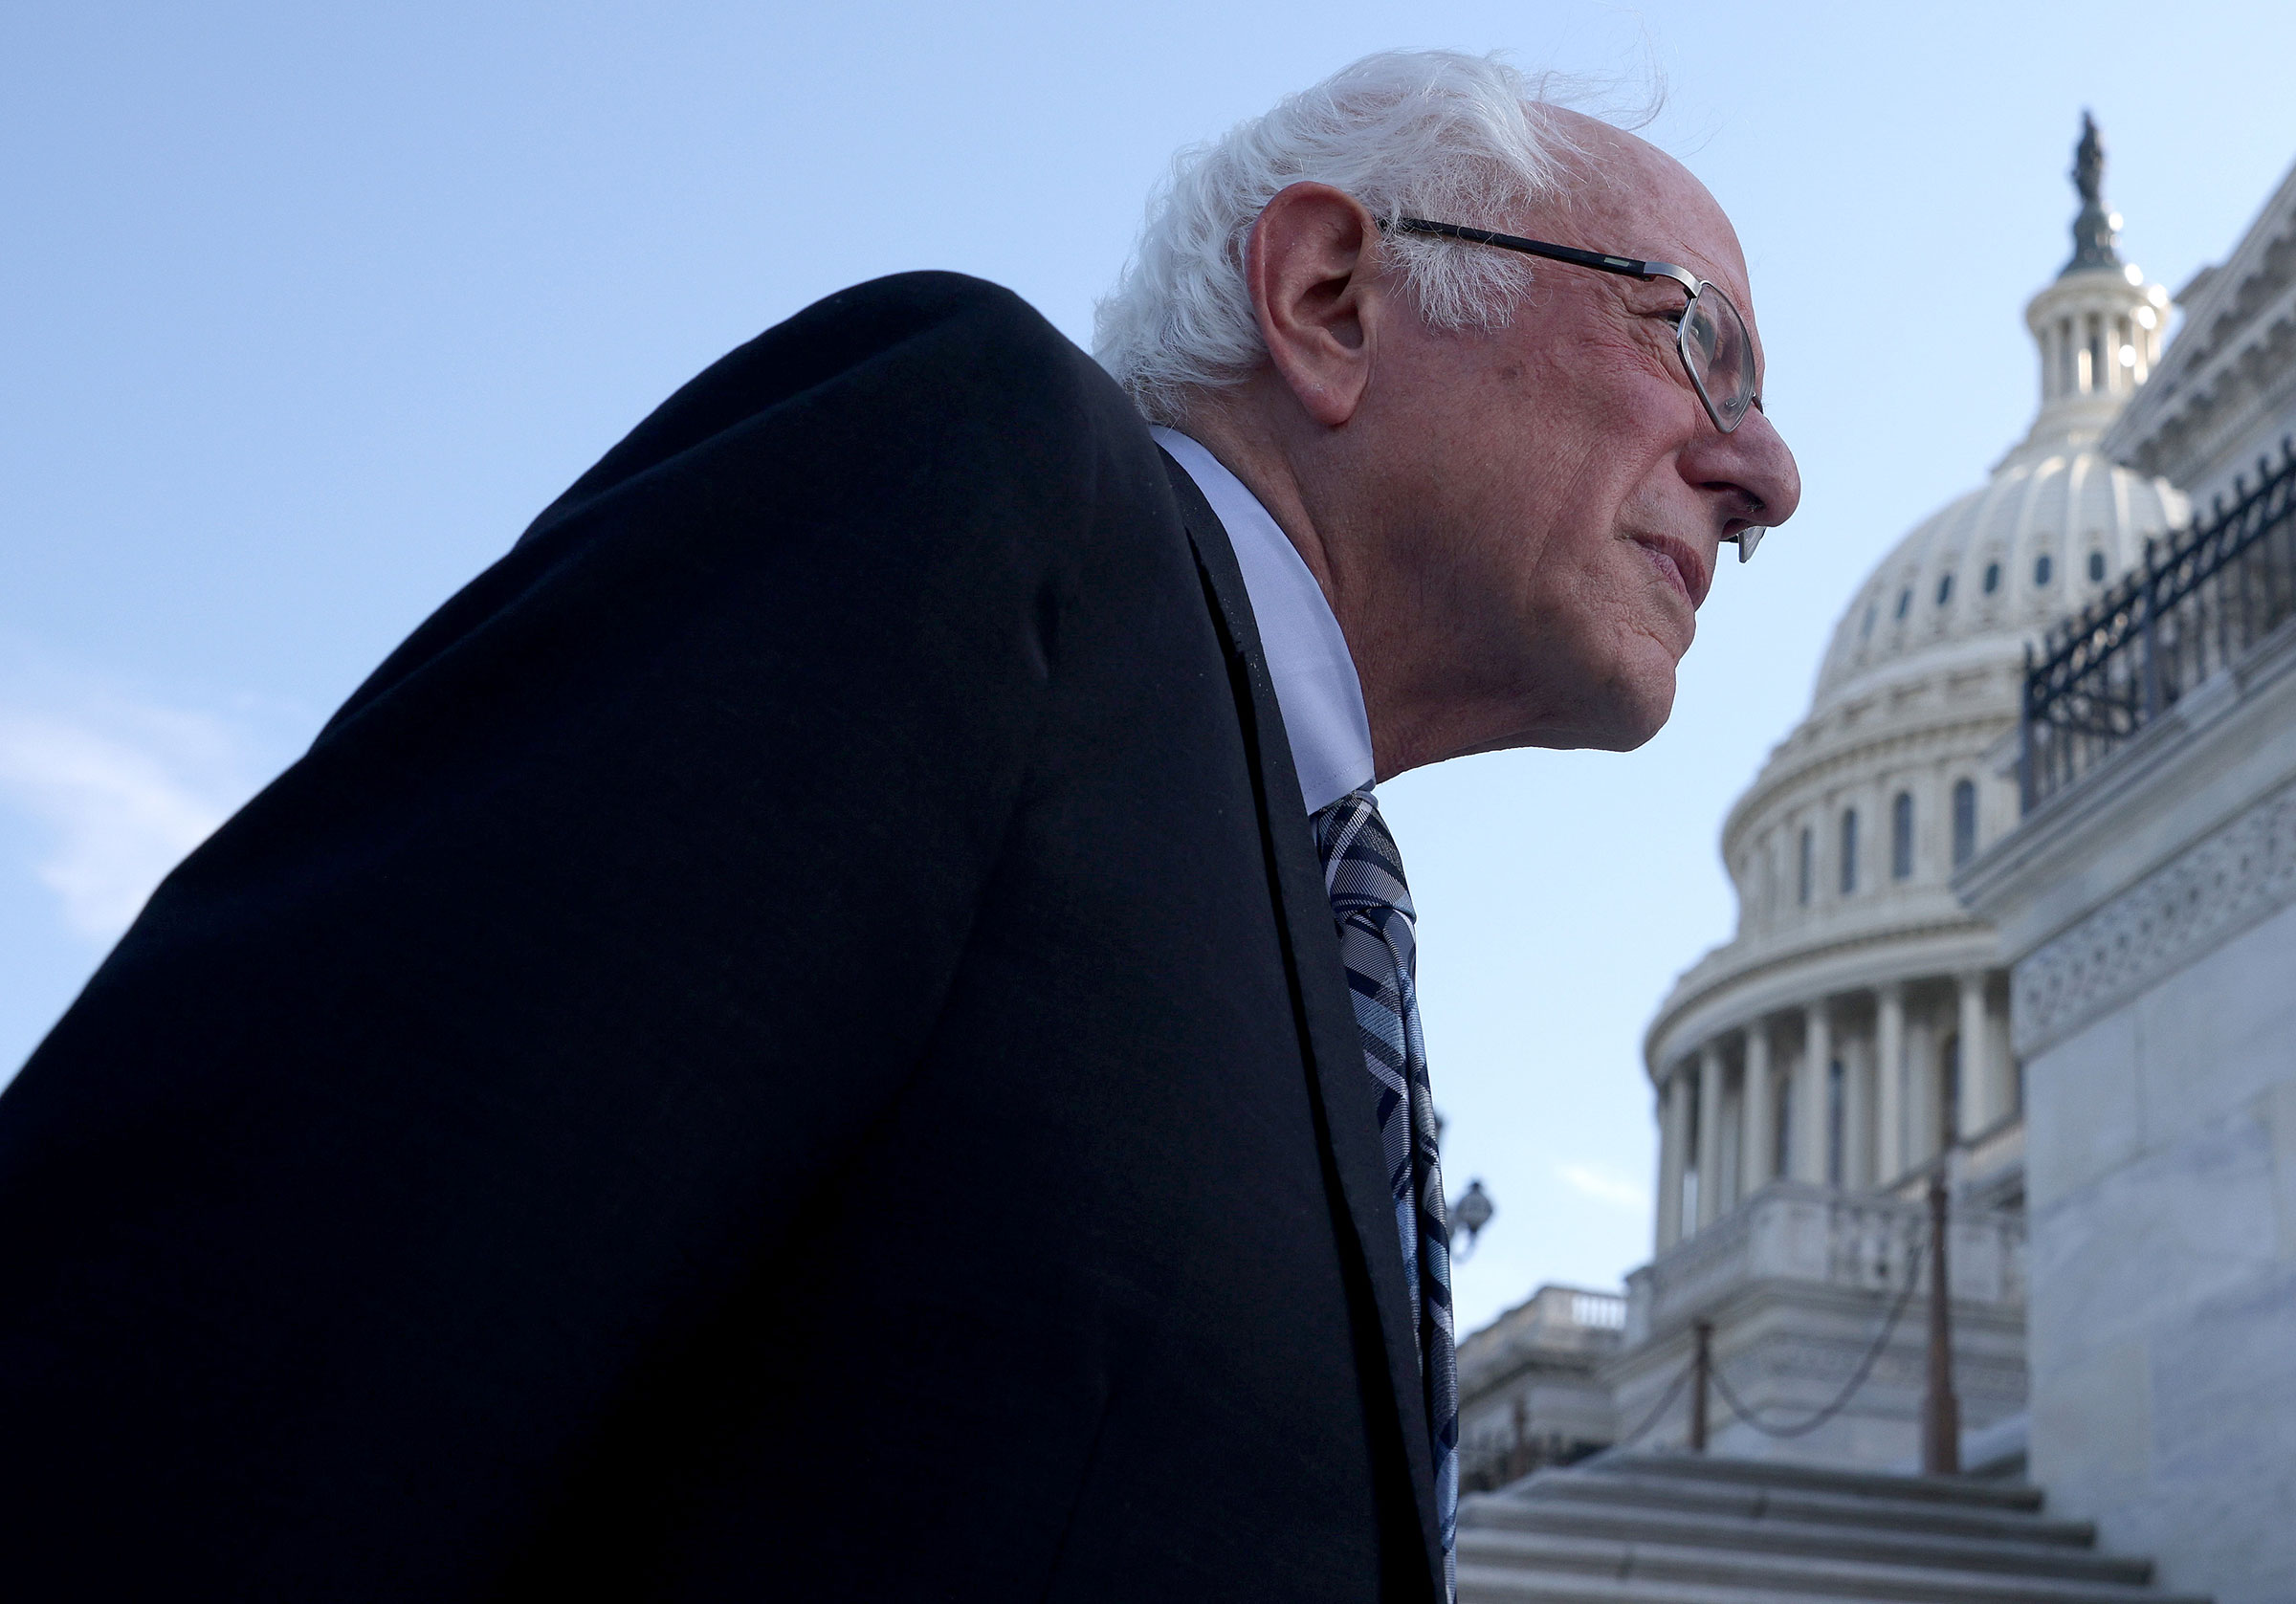 Sen. Bernie Sanders arrives at the Capitol after meeting with President Joe Biden at the White House in Washington, on July 12, 2021. (Win McNamee—Getty Images)